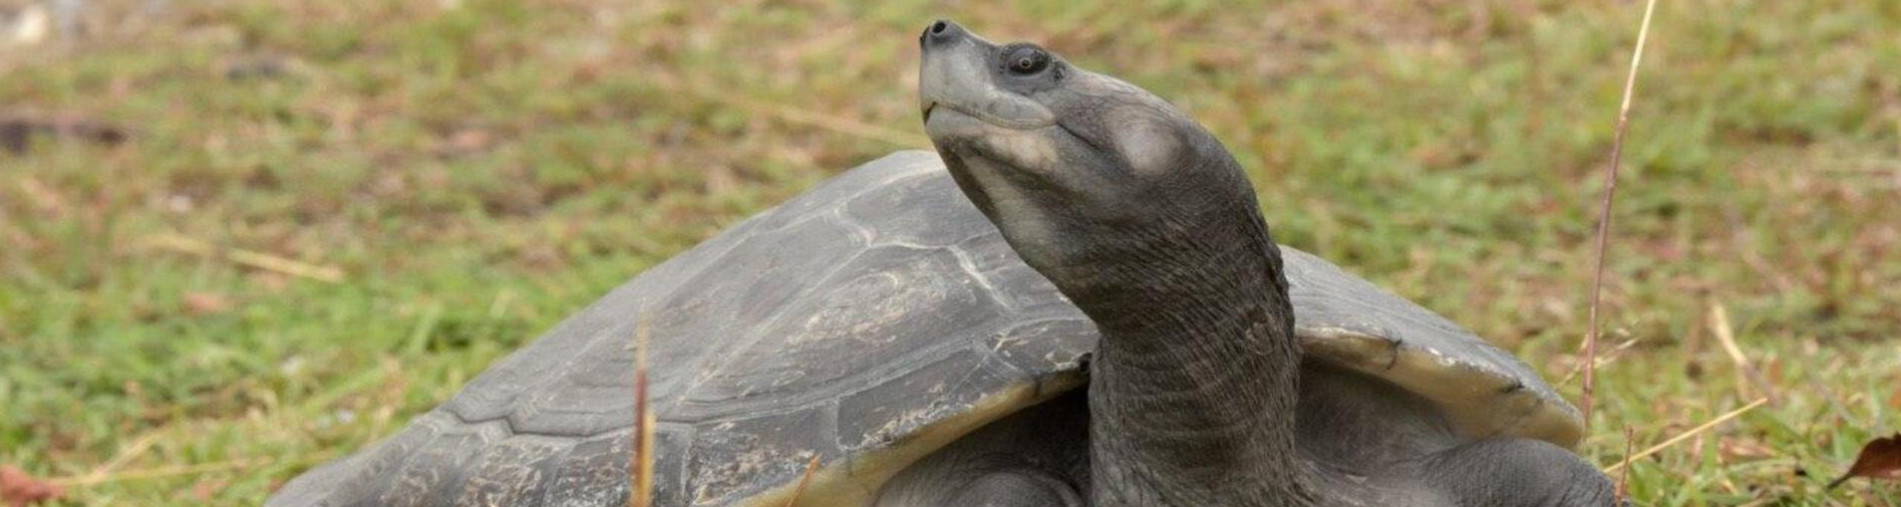 Save the Endangered Terrapins, Start with You 